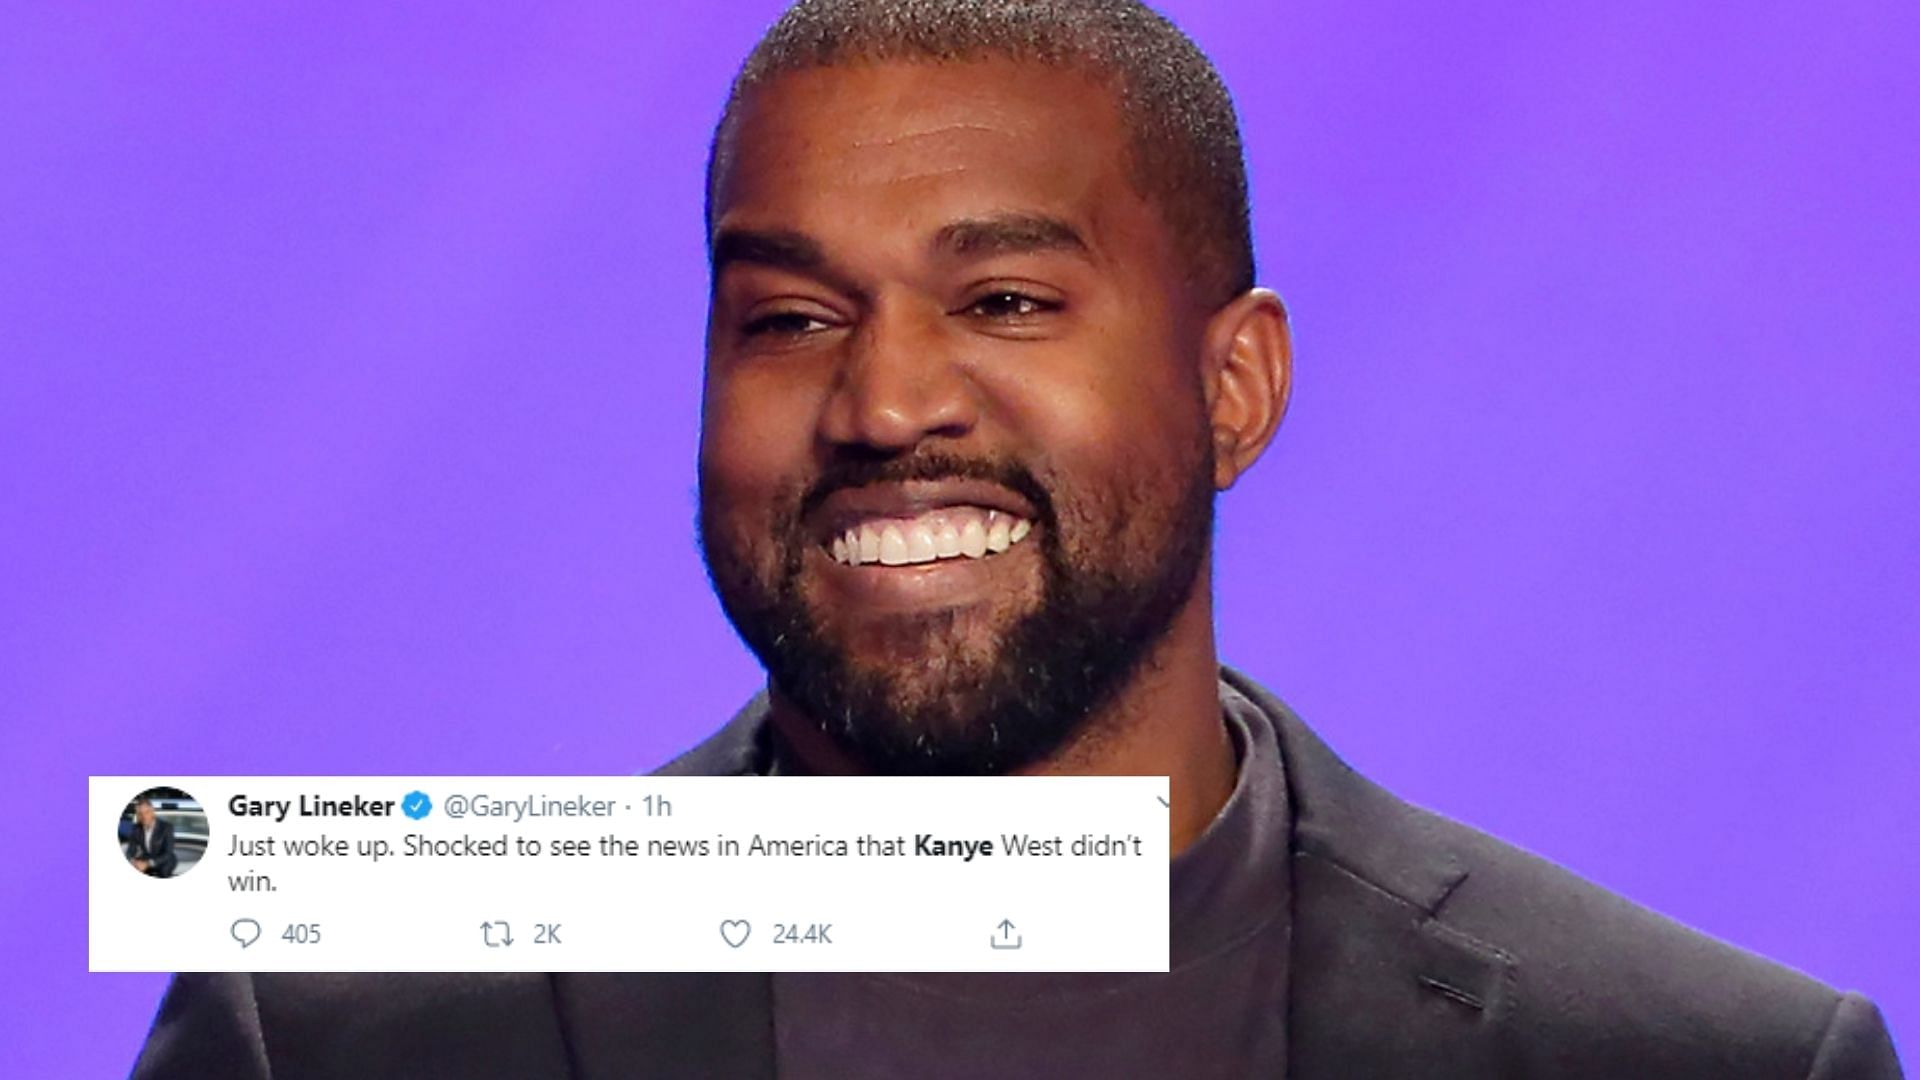 Twitter Floods With Memes After Kanye West Aims For 2024 Elections